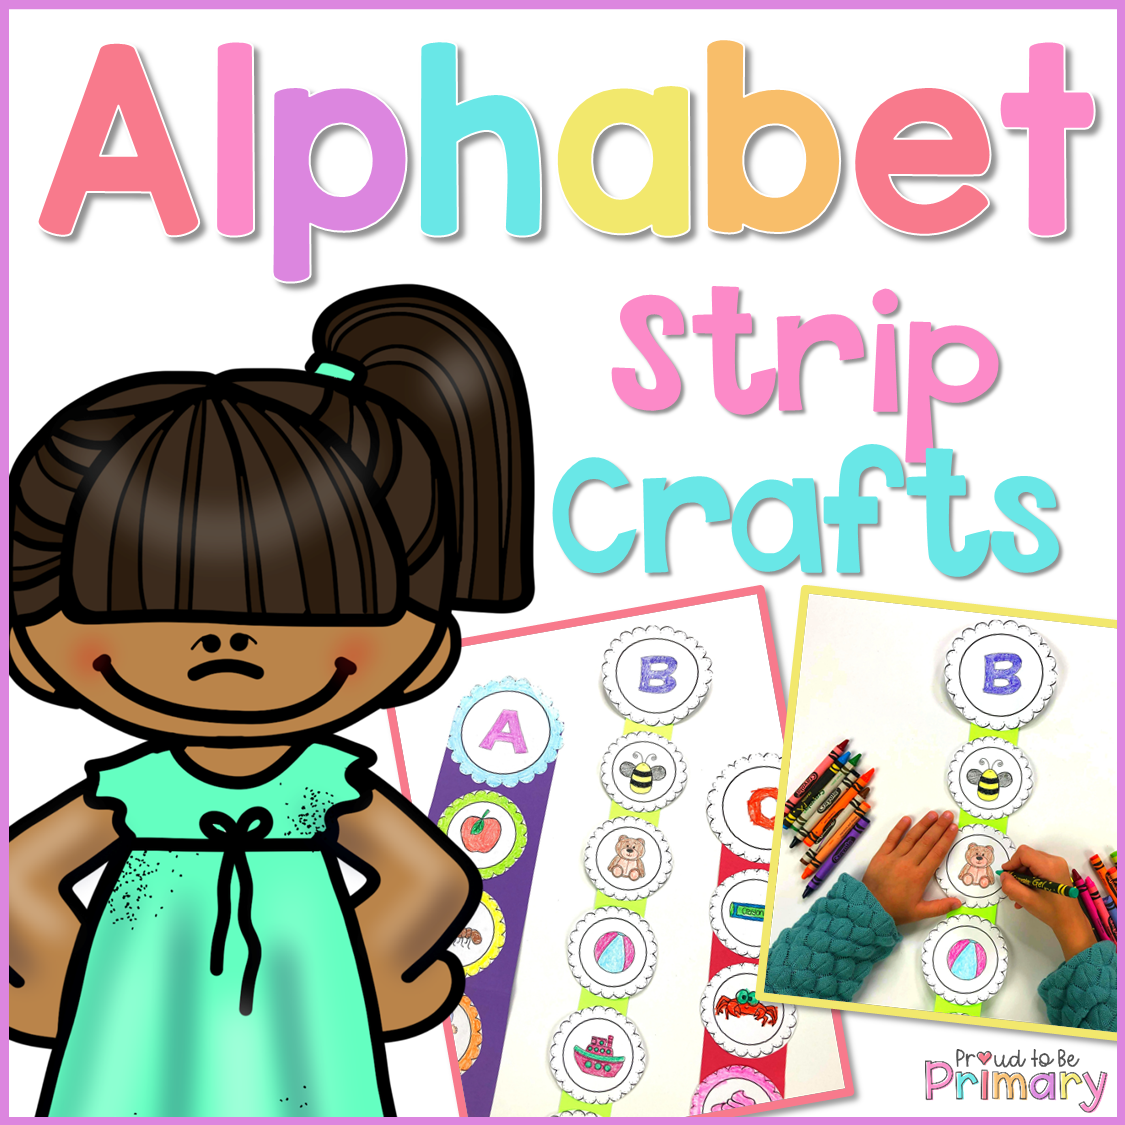 Letter B Craft - Alphabet Crafts - A Spoonful of Learning